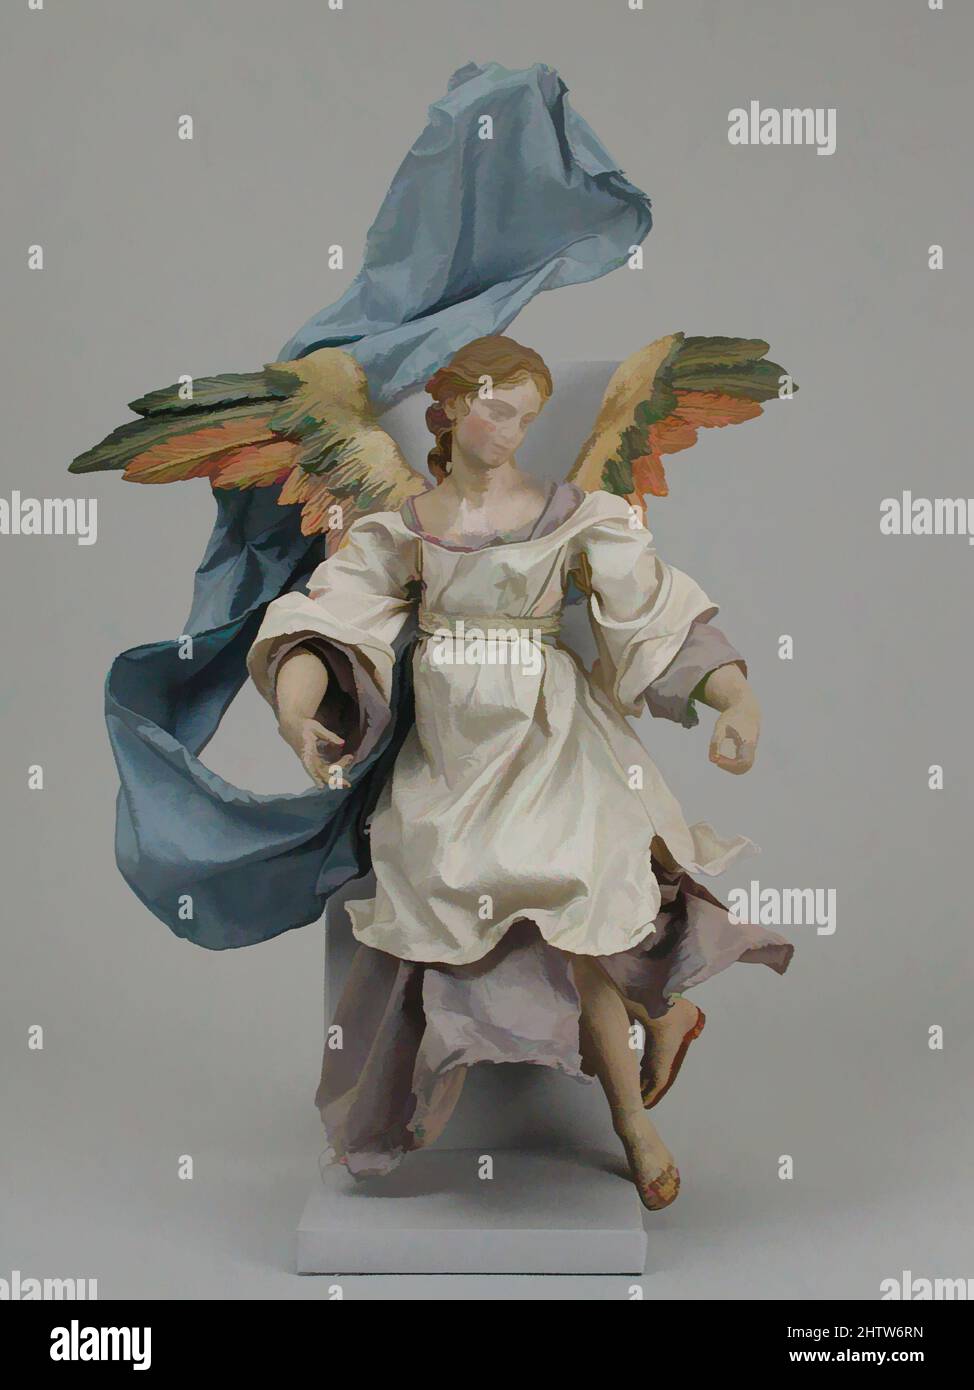 Art inspired by Angel, second half 18th century, Italian, Naples, Polychromed terracotta head; wooden limbs and wings; body of wire wrapped in tow; various fabrics, H. 16 1/8 in. (41 cm.), Crèche, Classic works modernized by Artotop with a splash of modernity. Shapes, color and value, eye-catching visual impact on art. Emotions through freedom of artworks in a contemporary way. A timeless message pursuing a wildly creative new direction. Artists turning to the digital medium and creating the Artotop NFT Stock Photo